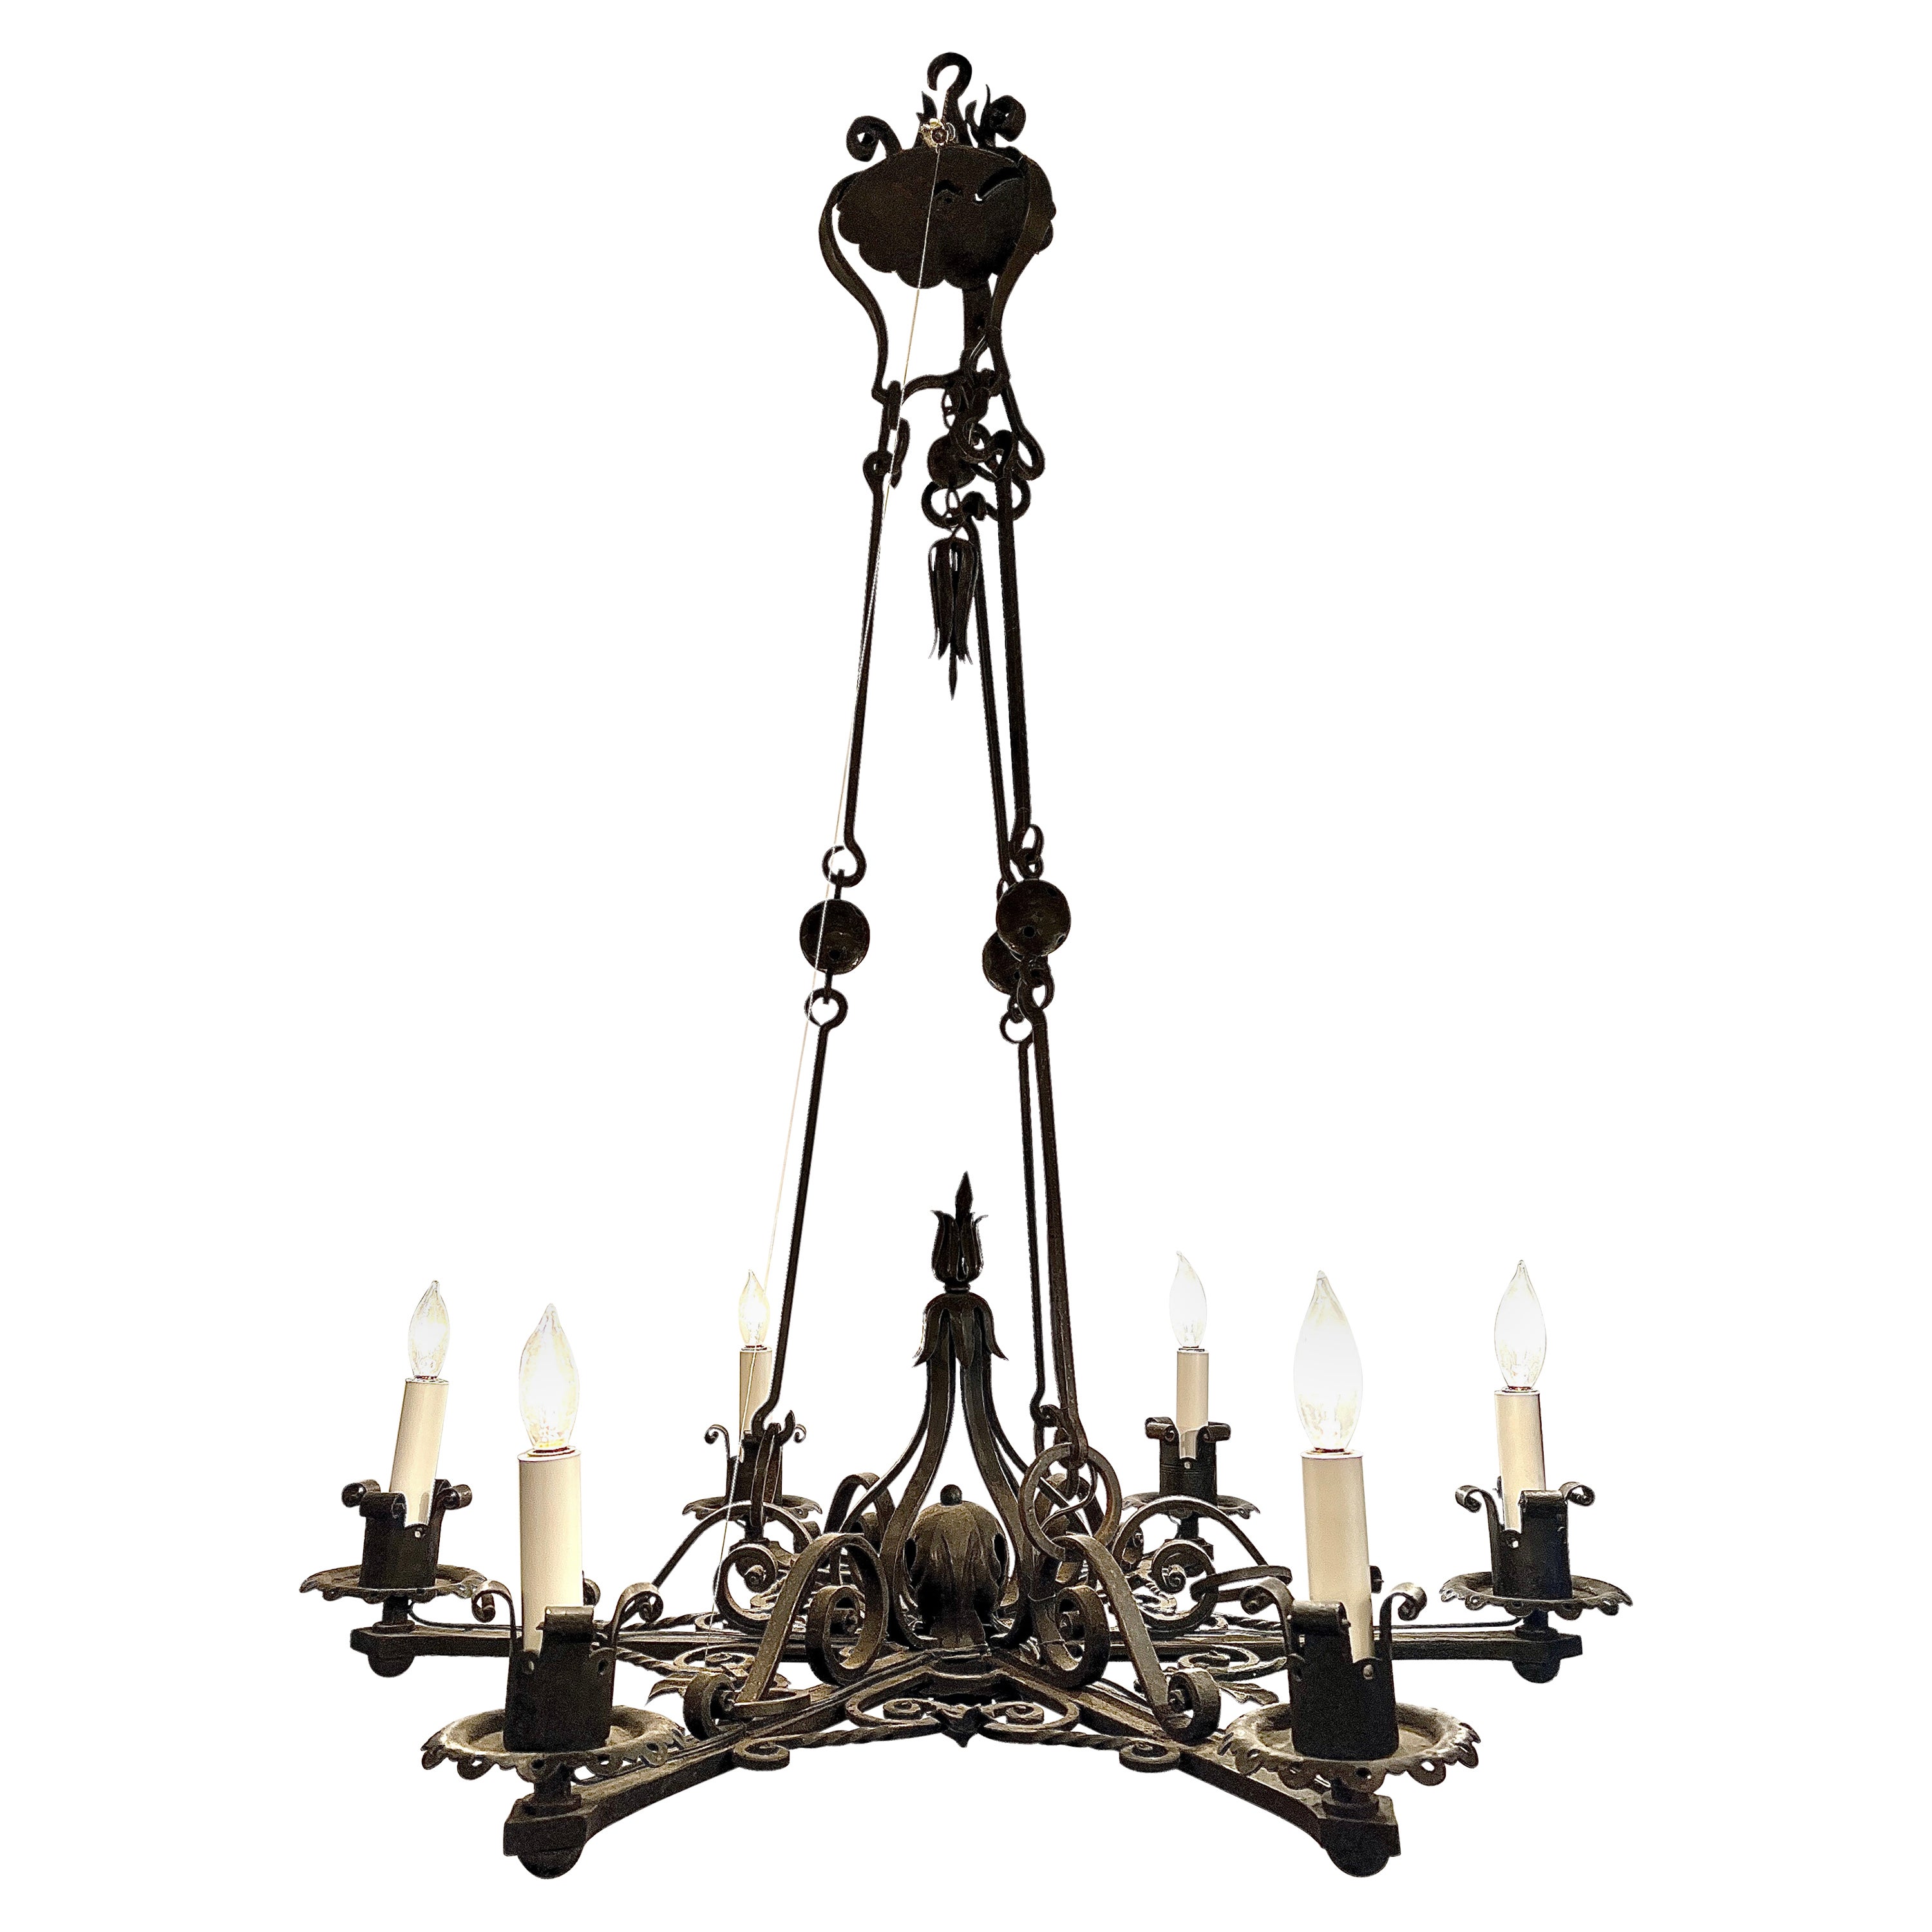 Antique French Wrought Iron Chandelier, Circa 1900-1910.